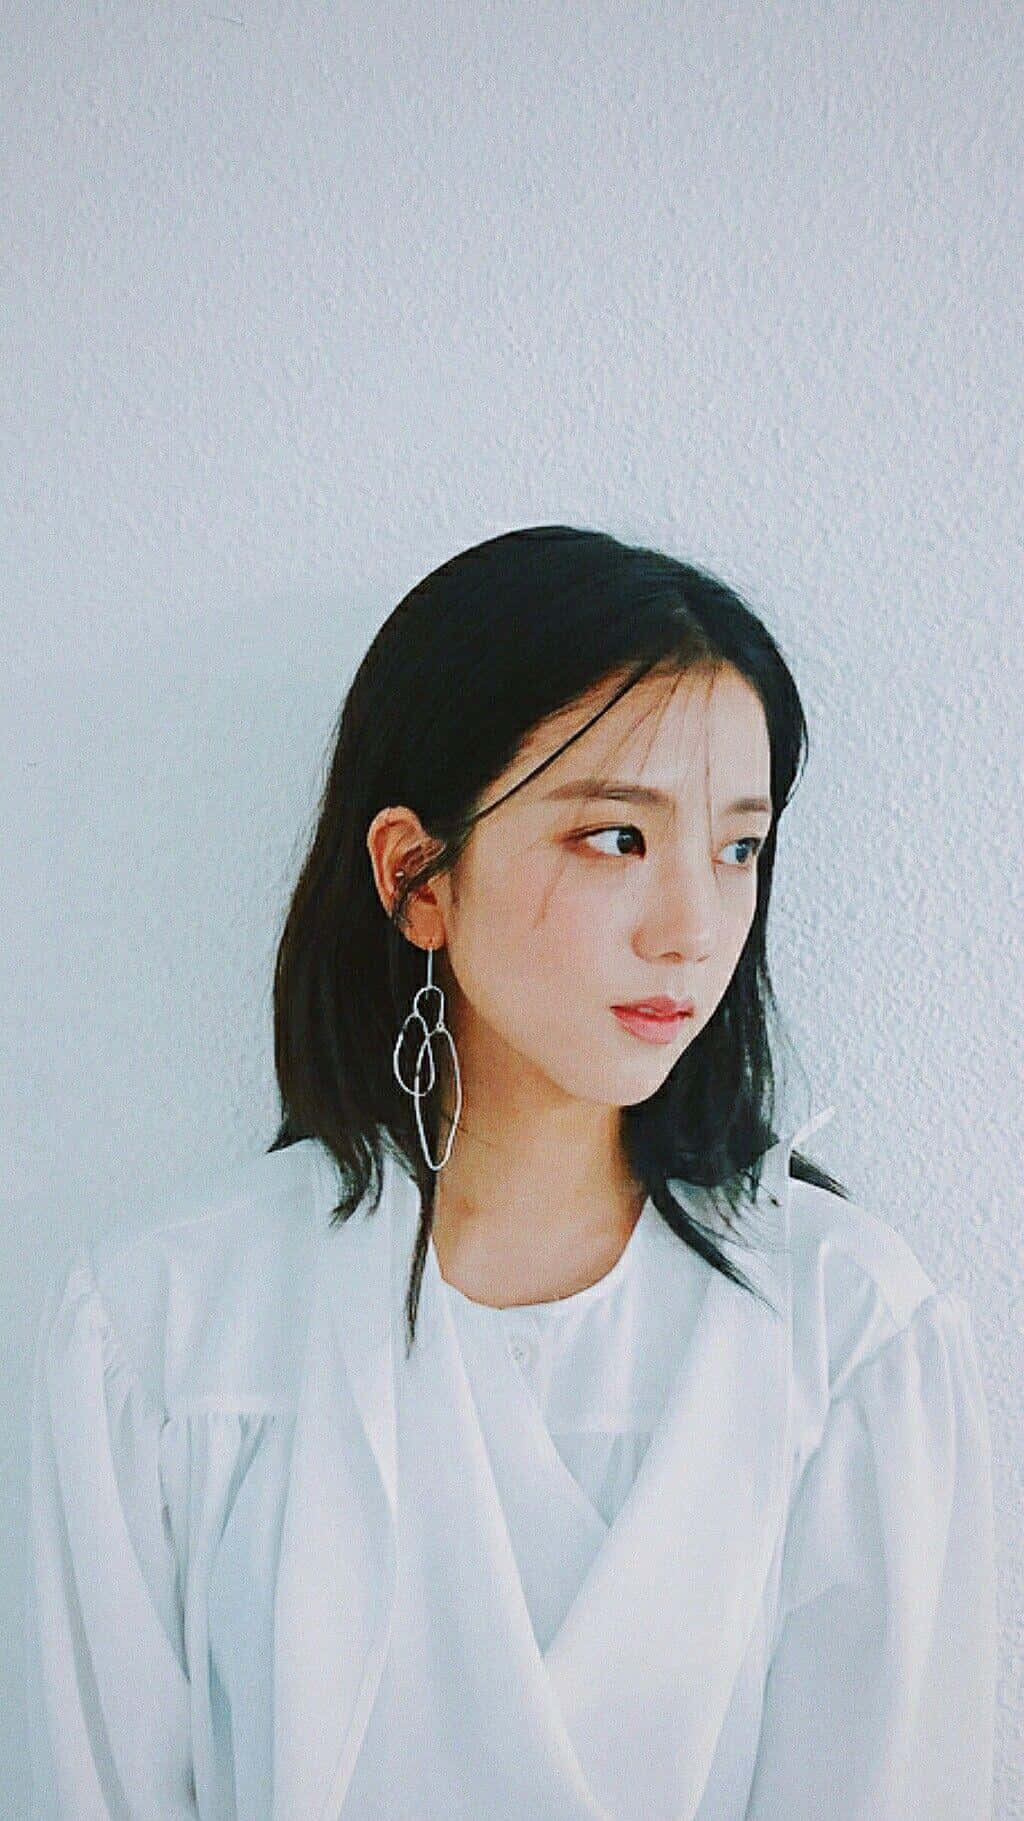 Jisoo Blackpink Charming White Outfit Background